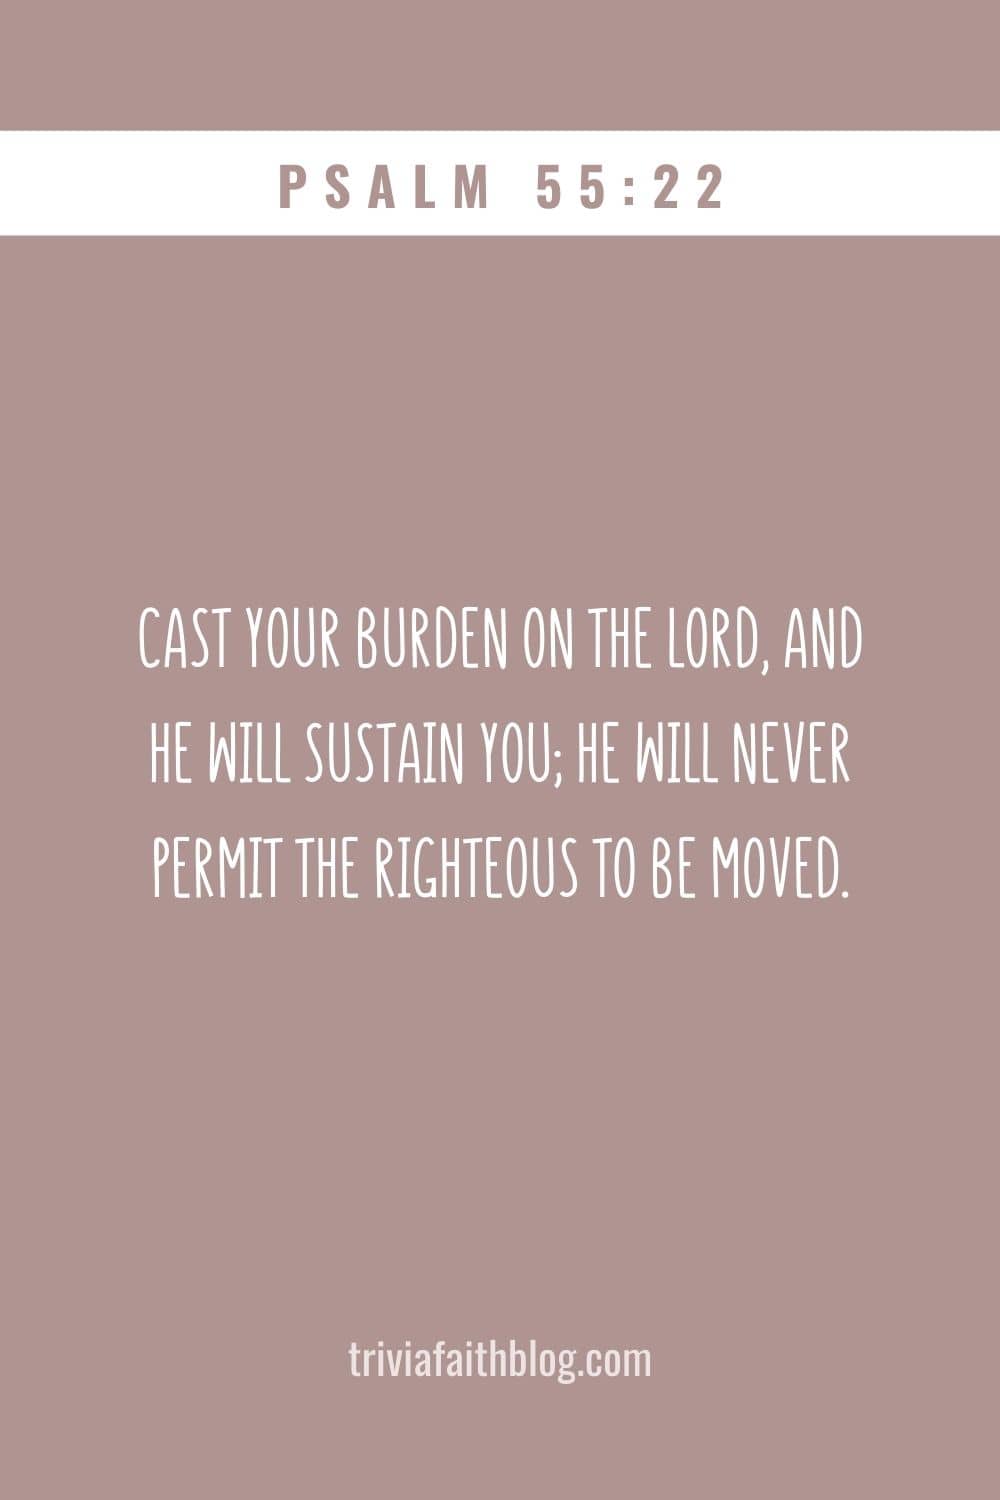 Cast your burden on the LORD, and he will sustain you; he will never permit the righteous to be moved